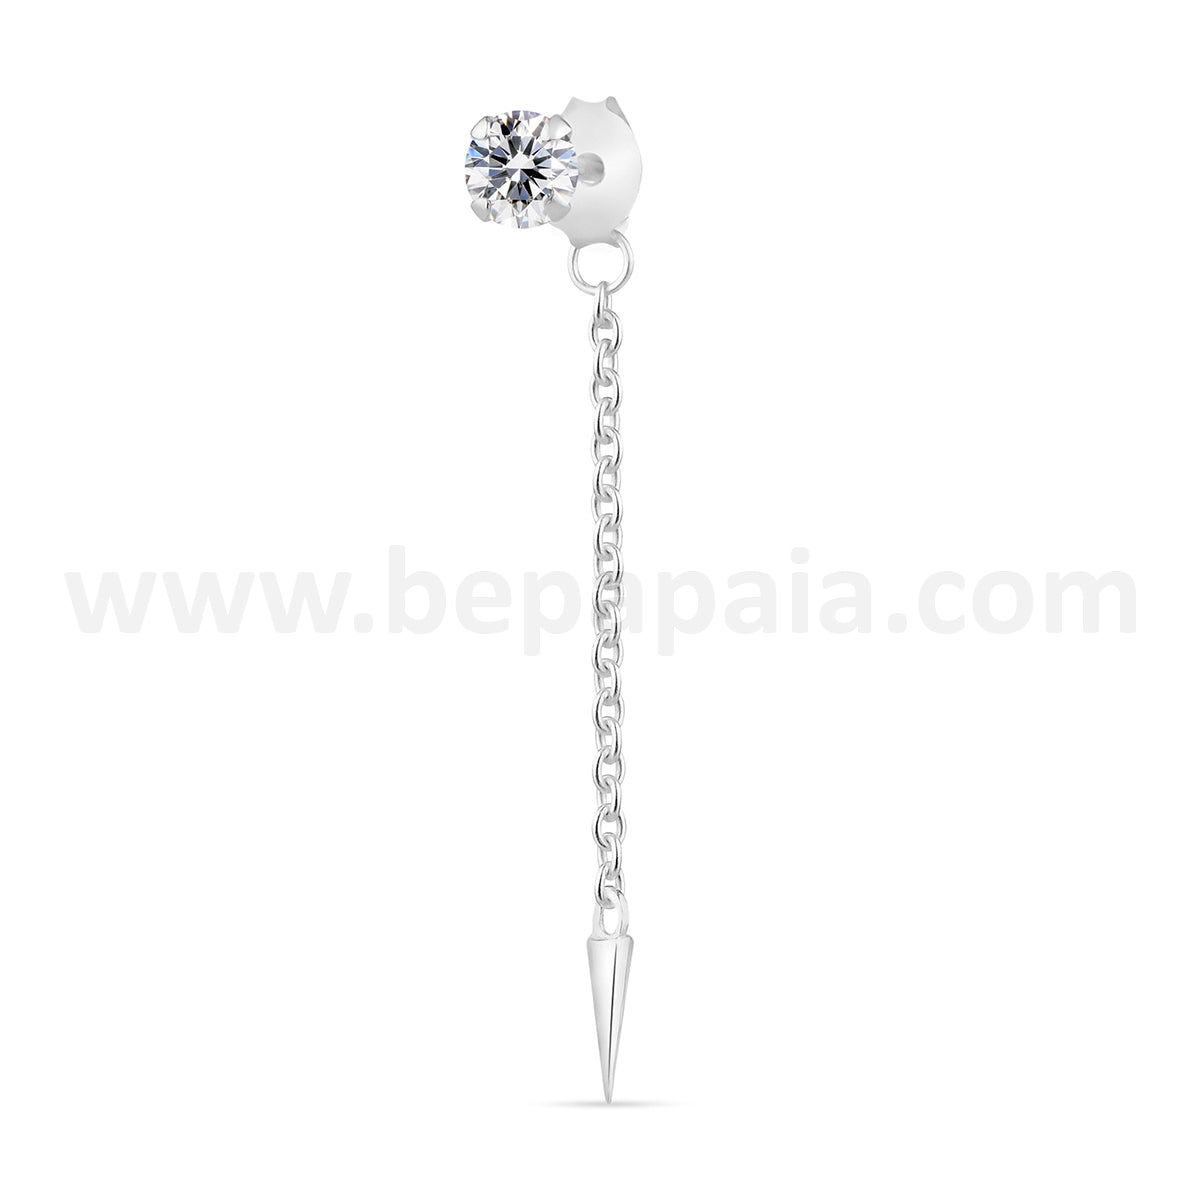 Silver ear stud with cubic zirconia, chain and spike